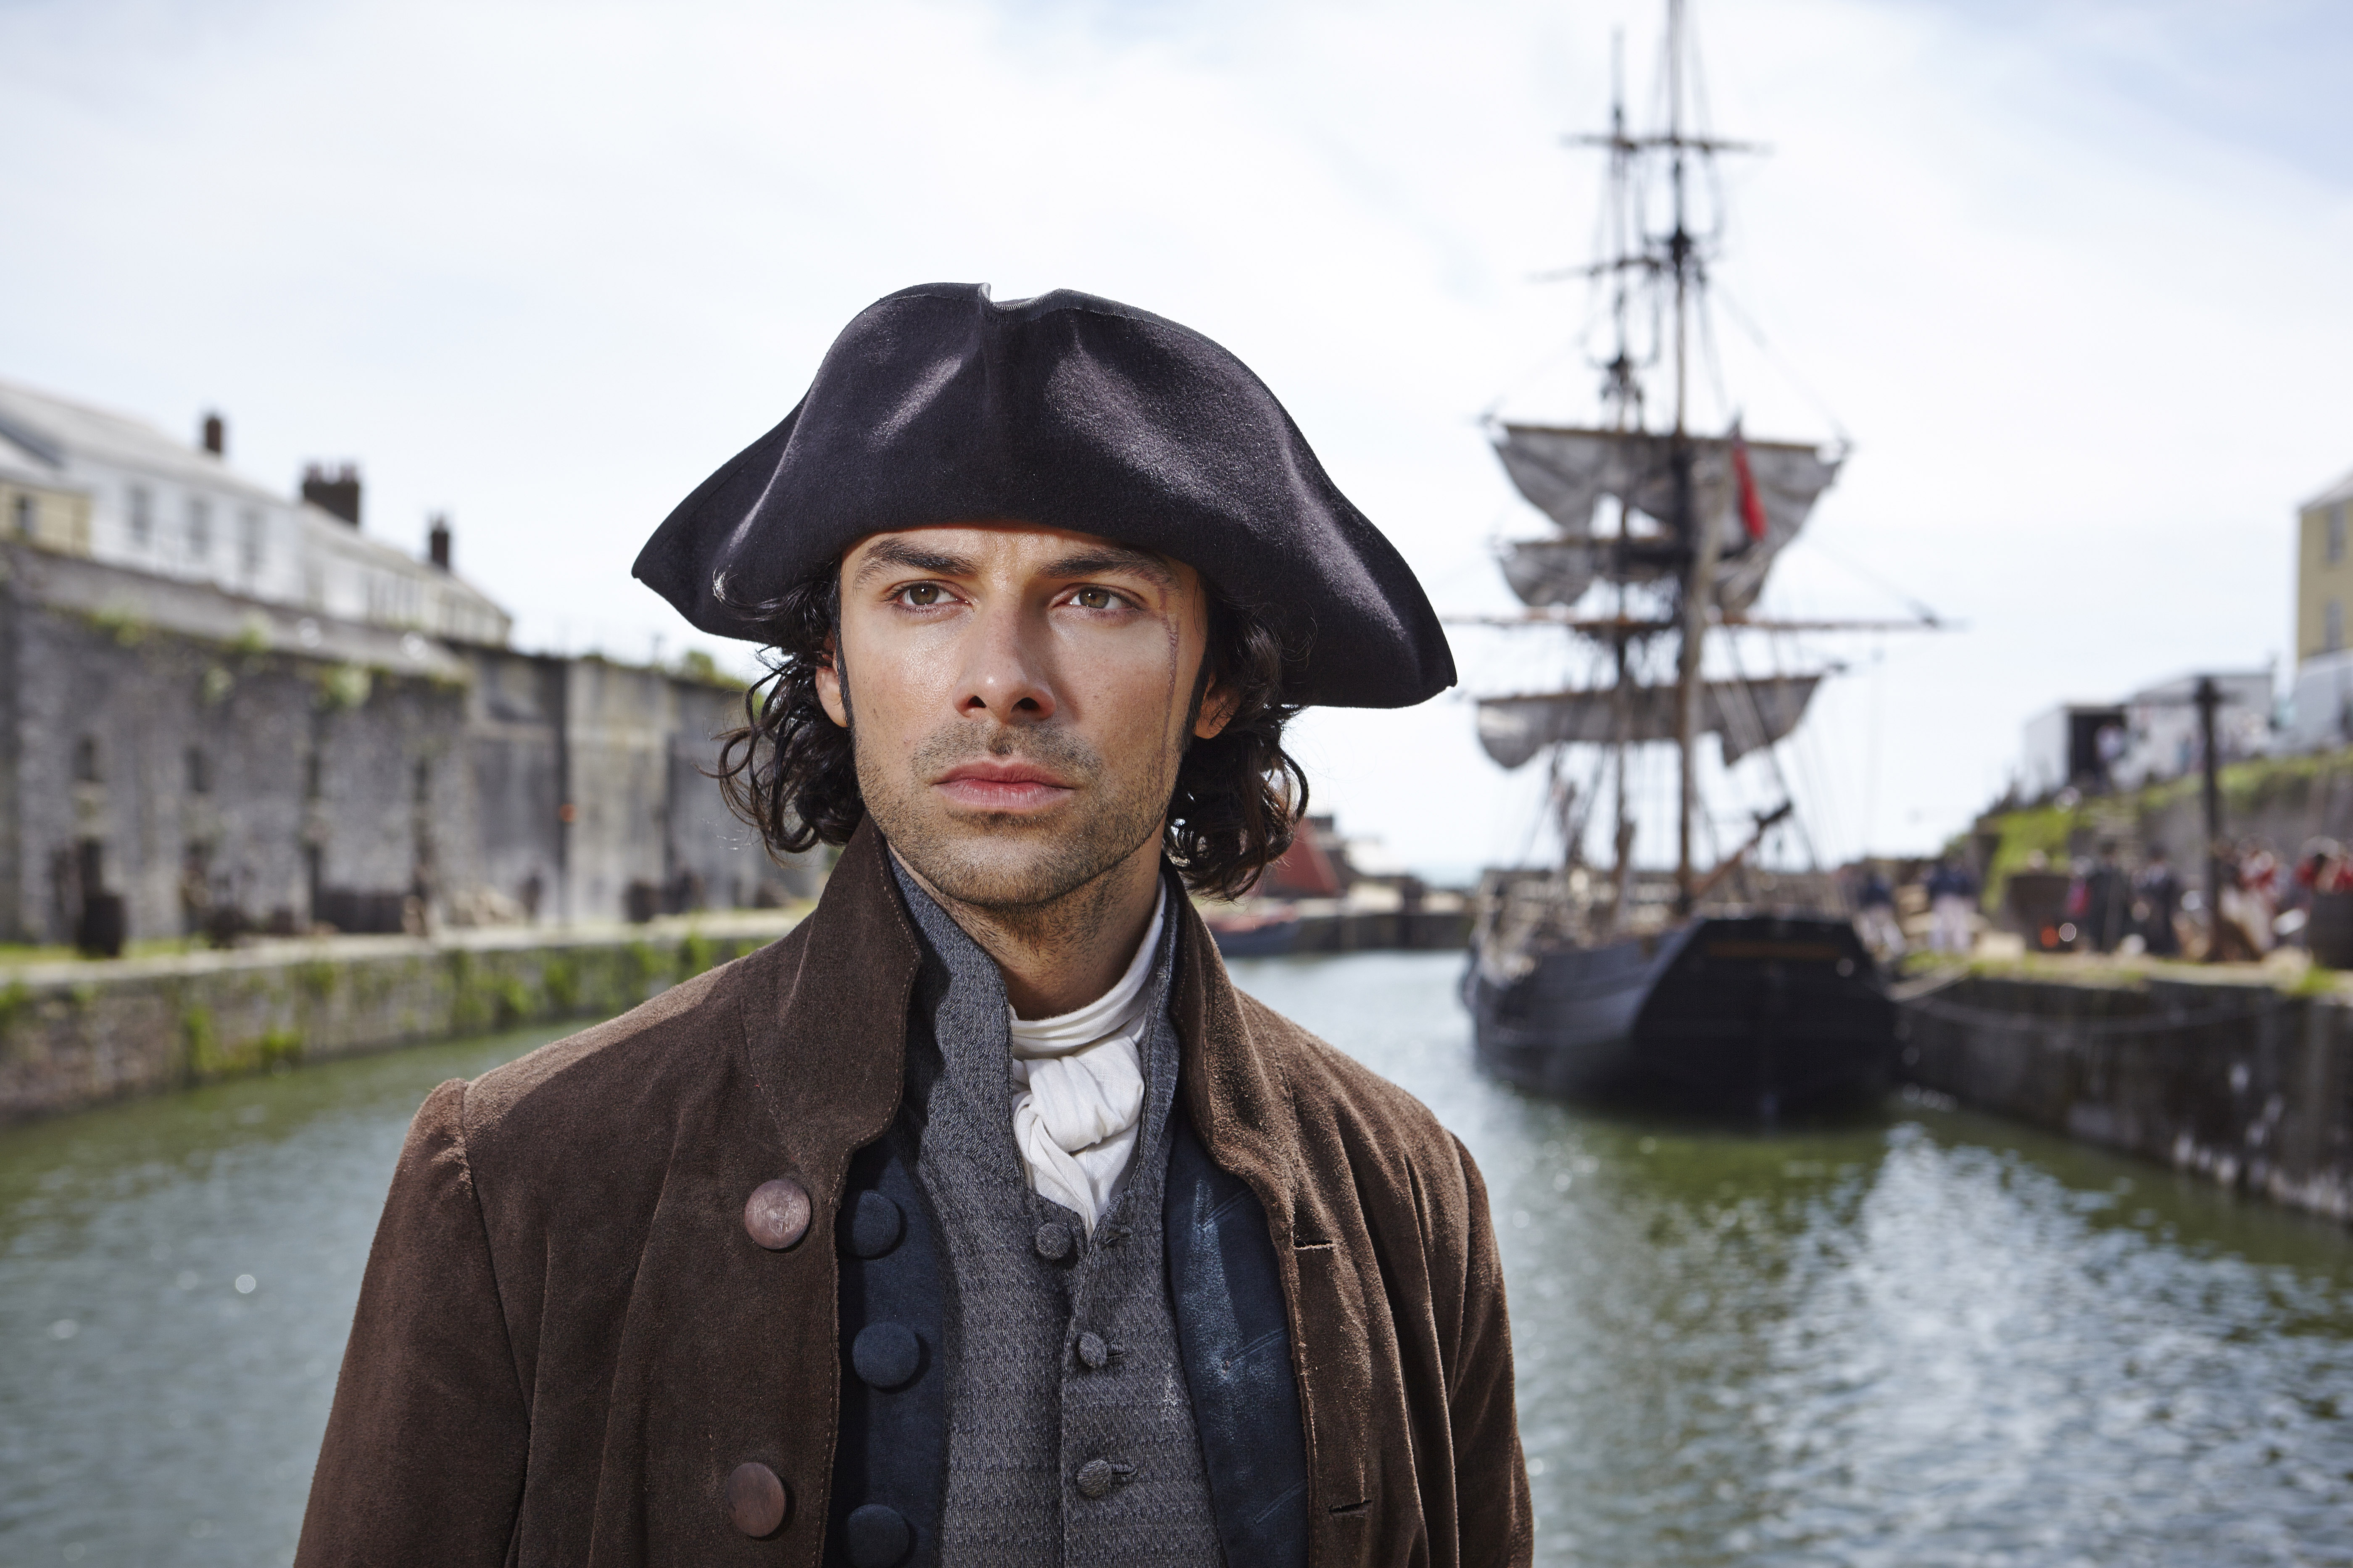 Poldark\nSundays, June 21 - August 2, 2015 on MASTERPIECE on PBS\n\nPart Seven\nSunday, August 2, 9:00 - 10:00pm ET\nWhen Verity makes her move, Poldark gets blamed and events spiral out of control.\nAn epidemic leads to tragedy. And a shipwreck is both a blessing and a curse.\n\n\nShown: Aidan Turner as Ross Poldark\n\n(C) Robert Viglasky/Mammoth Screen for MASTERPIECE\n\nThis image may be used only in the direct promotion of MASTERPIECE. No other rights are granted. All rights are reserved. Editorial use only